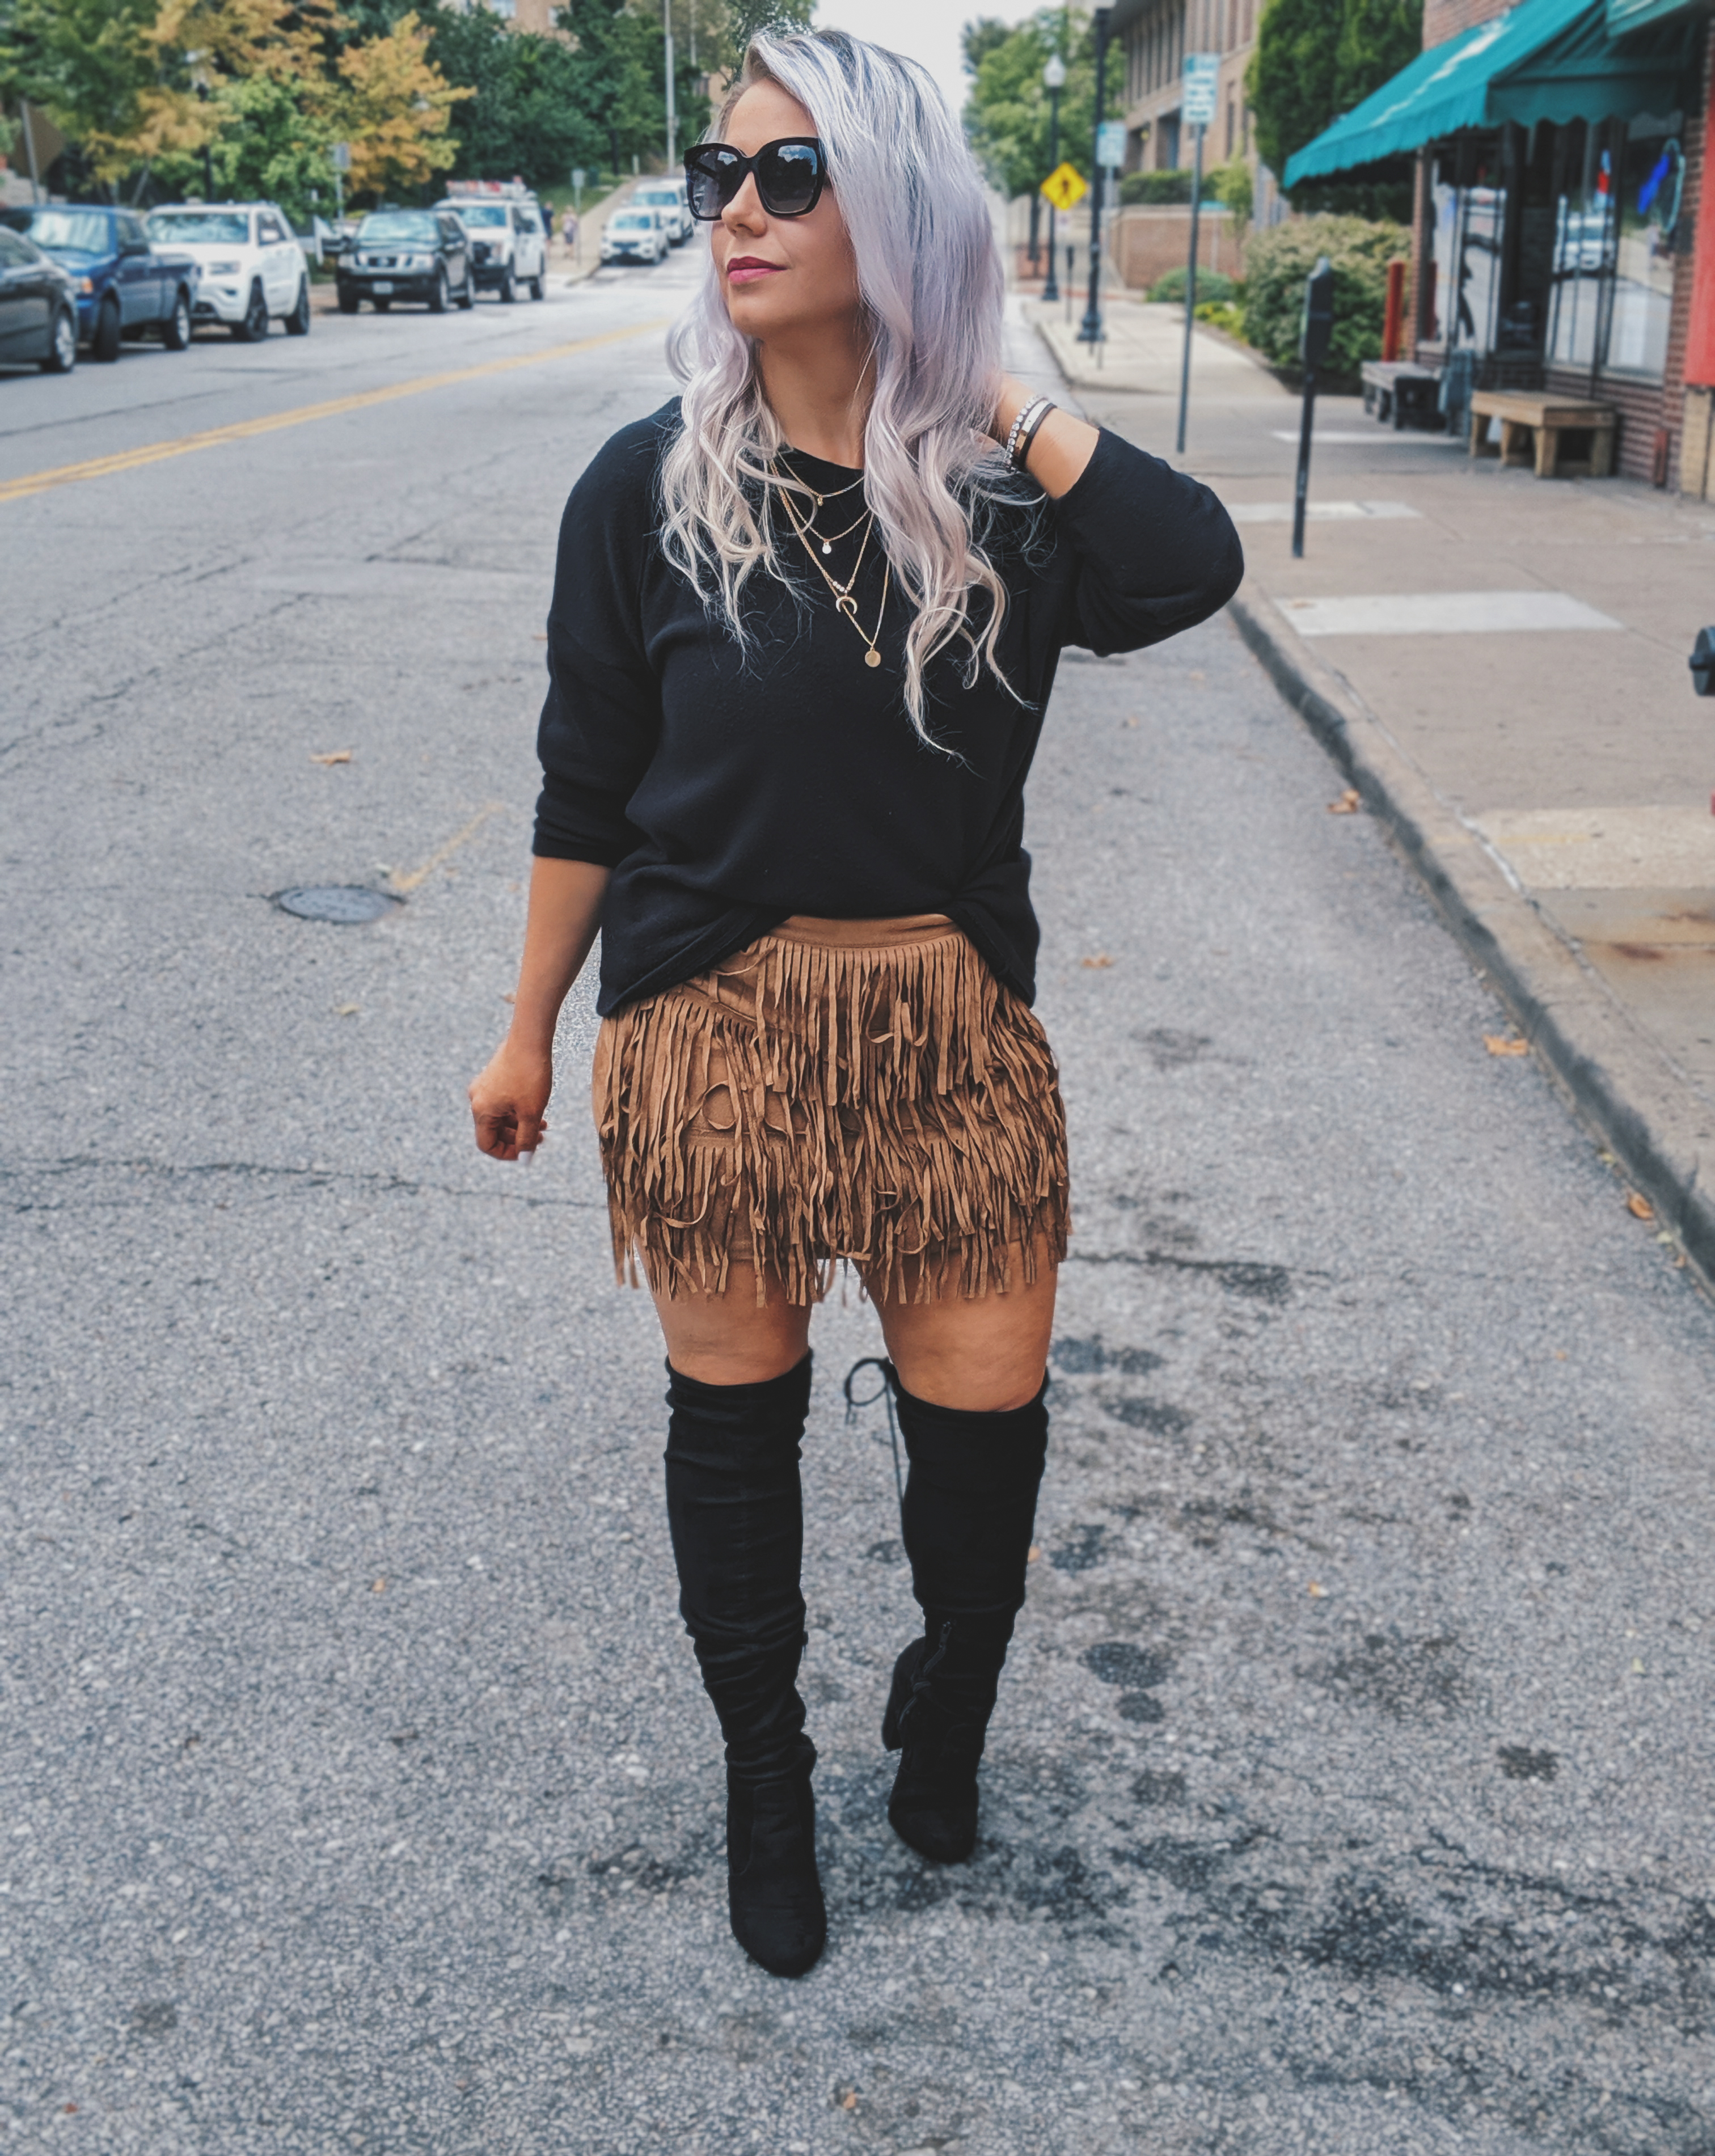 Fall outfit goals :) I NEED this fringe skirt! Fashion blogger Tricia Nibarger showcases fringe skirt outfit ideas for your fall outfits. Here's how to wear a fringe skirt in the fall and winter! This skirt is just $17 and a perfect addition to your fall 2019 wardrobe. #shein #sheingals #falloutfits